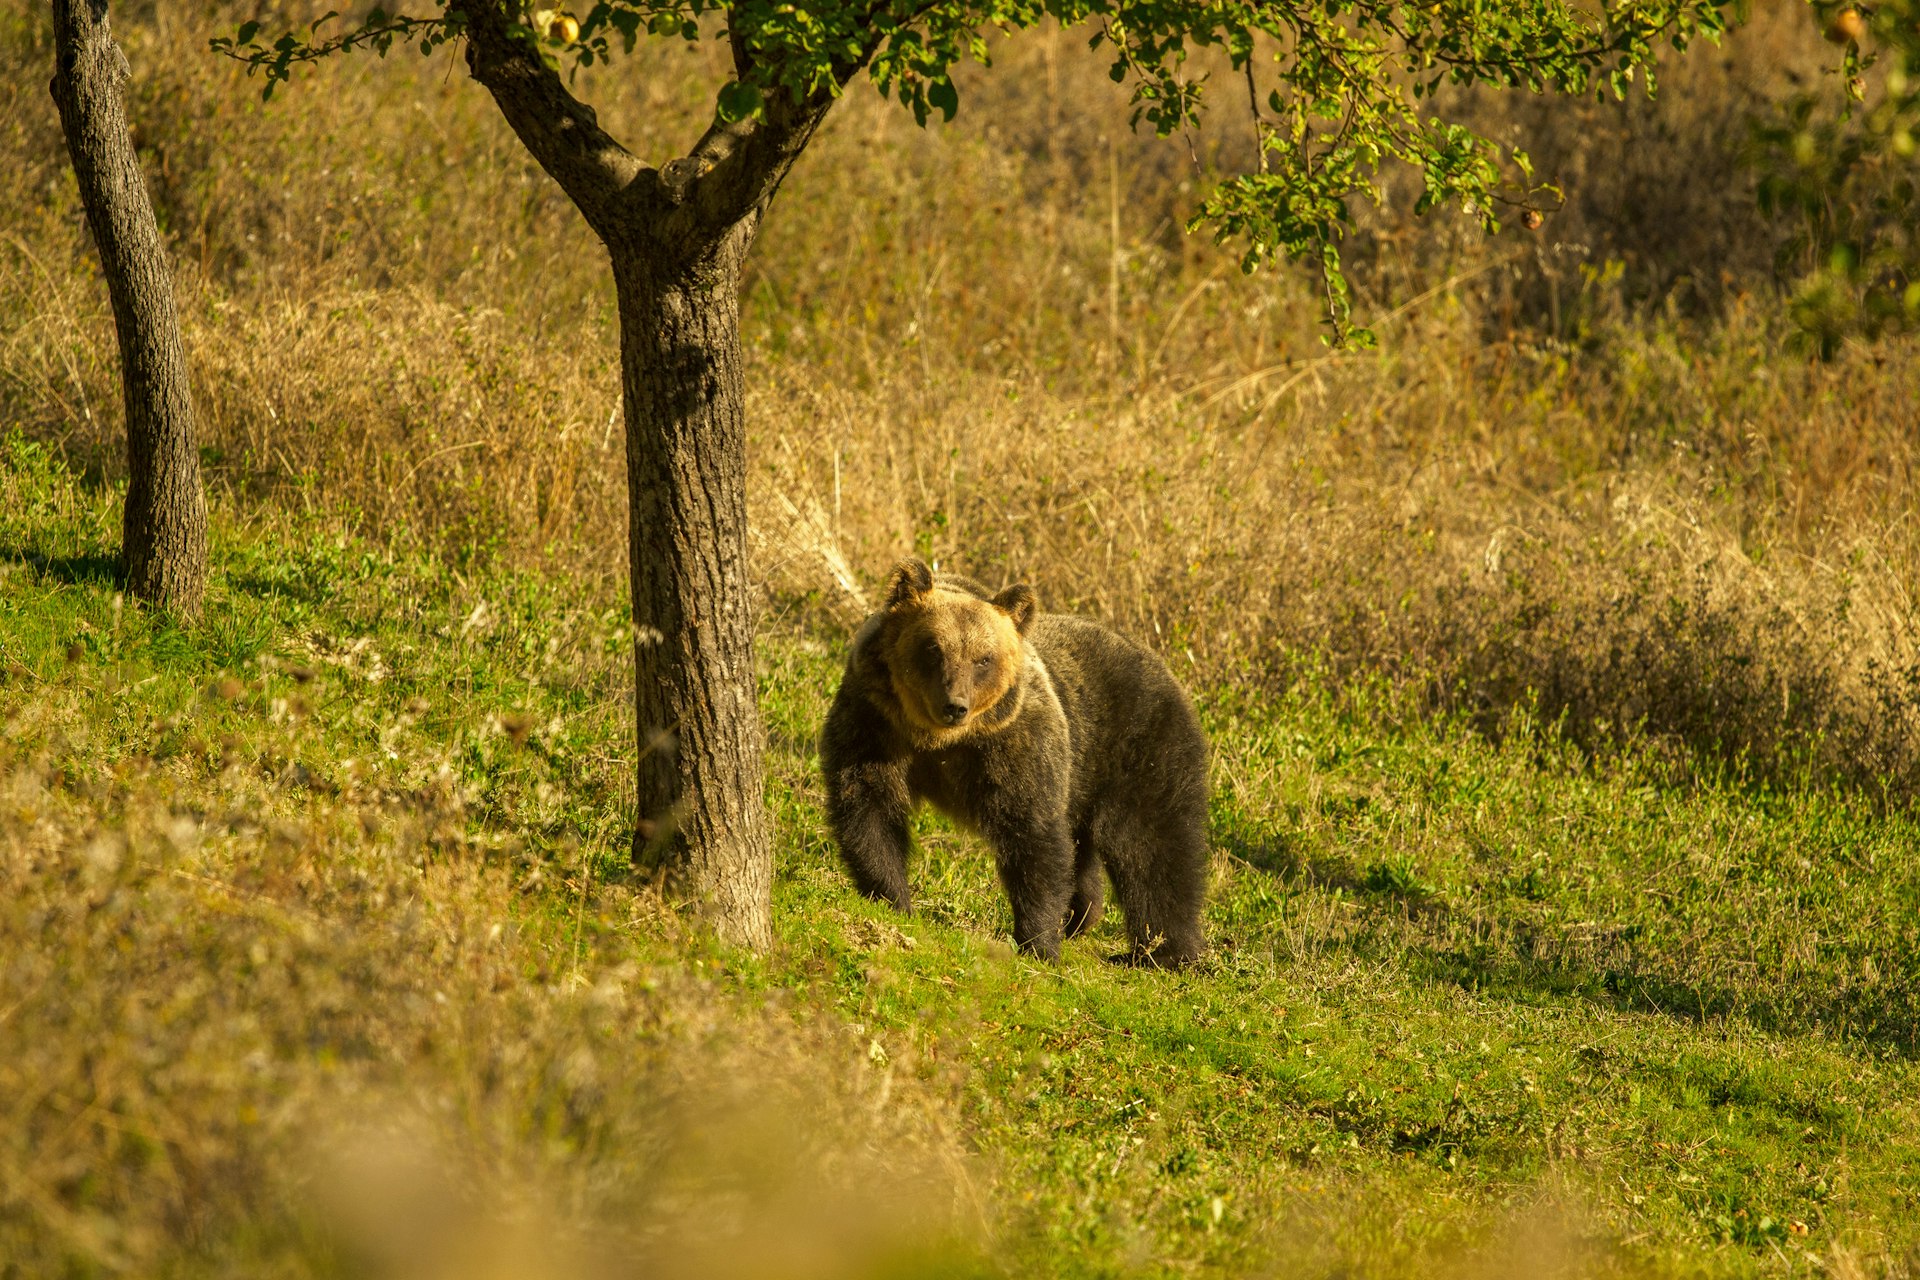 A small brown bear wanders through the undergrowth in a national park